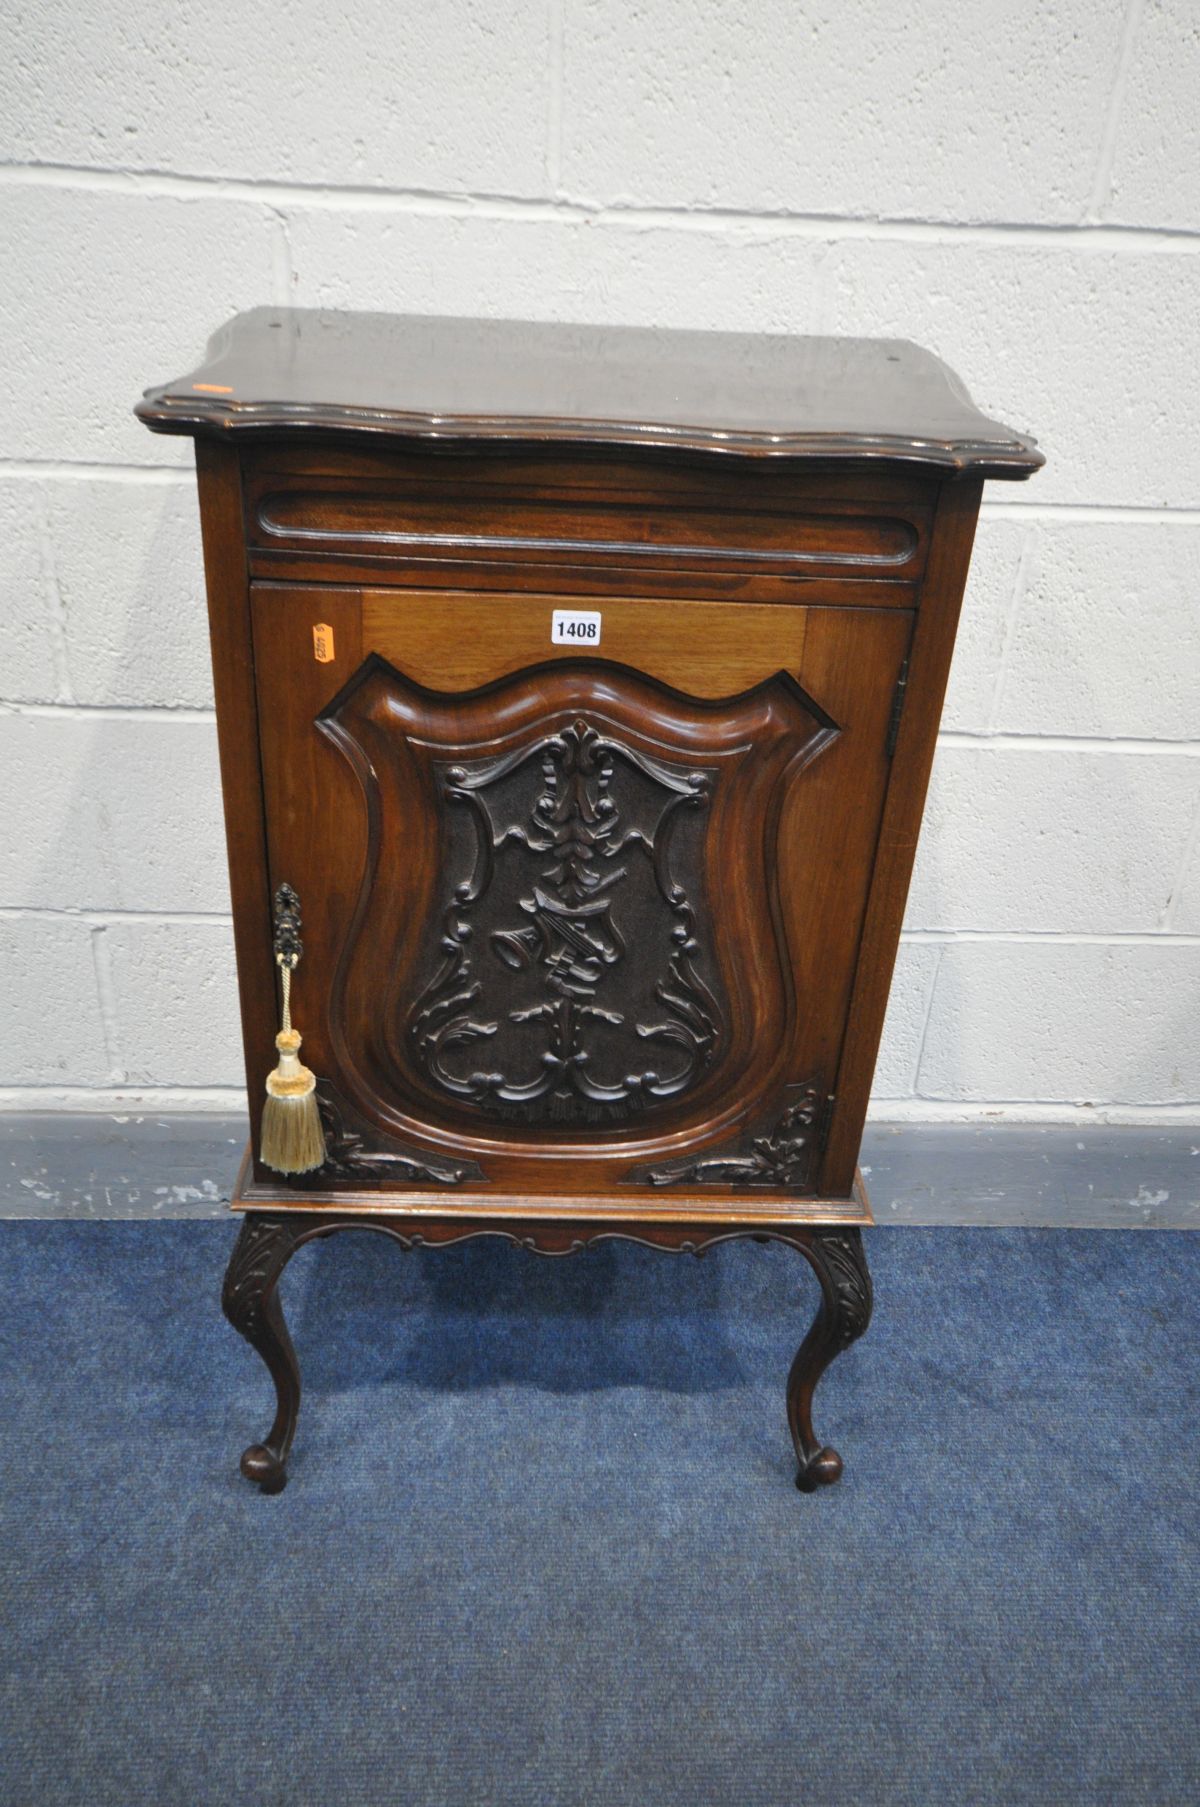 MAPLE AND CO OF LONDON AND PARIS, A EDWARDIAN MAHOGANY SINGLE DOOR CUPBOARD, with a foliate - Image 2 of 4